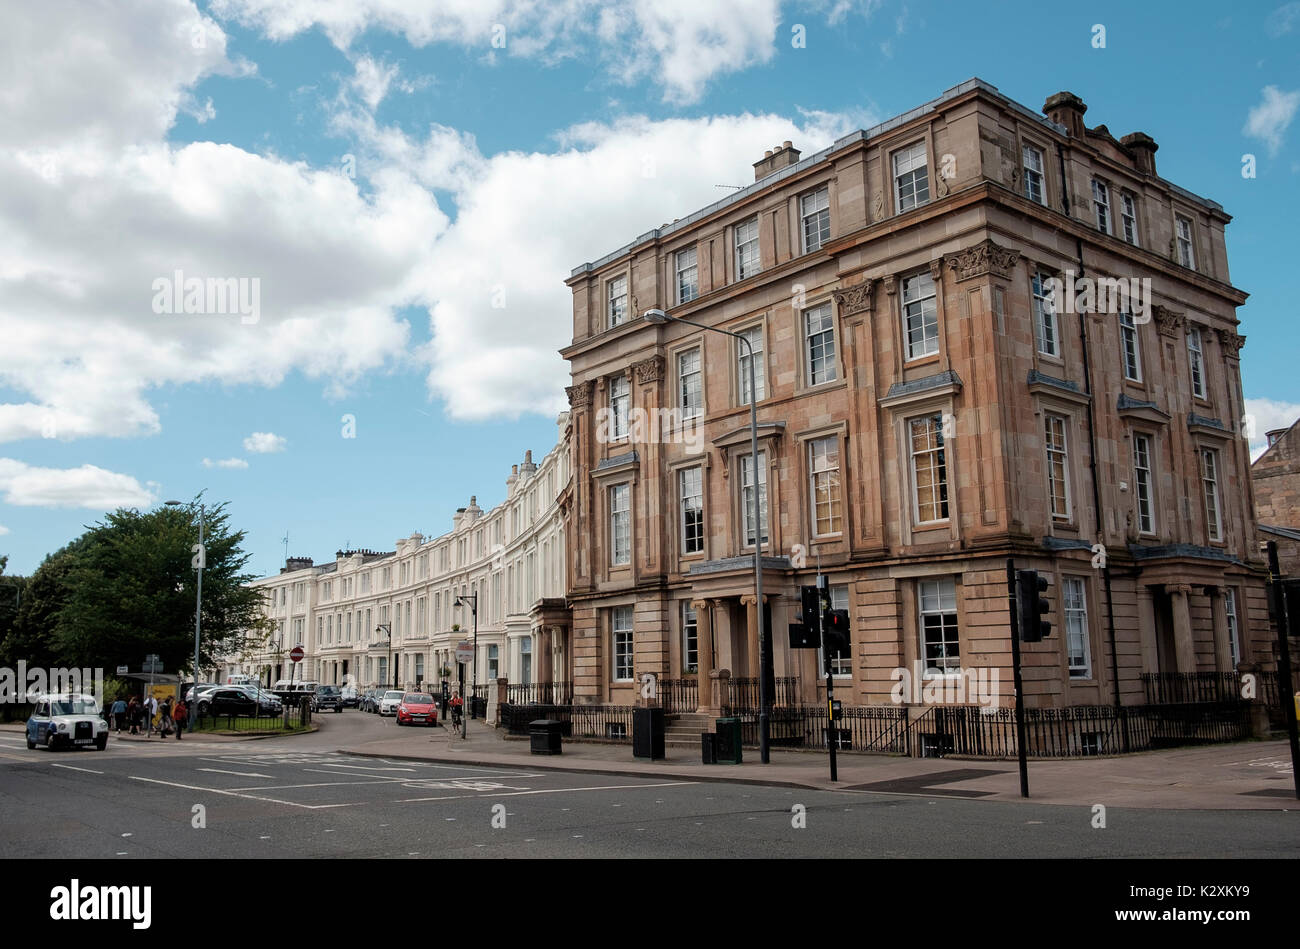 The architecture of the Royal Crescent terraced houses, just off Sauchiehall Street, Glasgow meets another fine mansion building Stock Photo